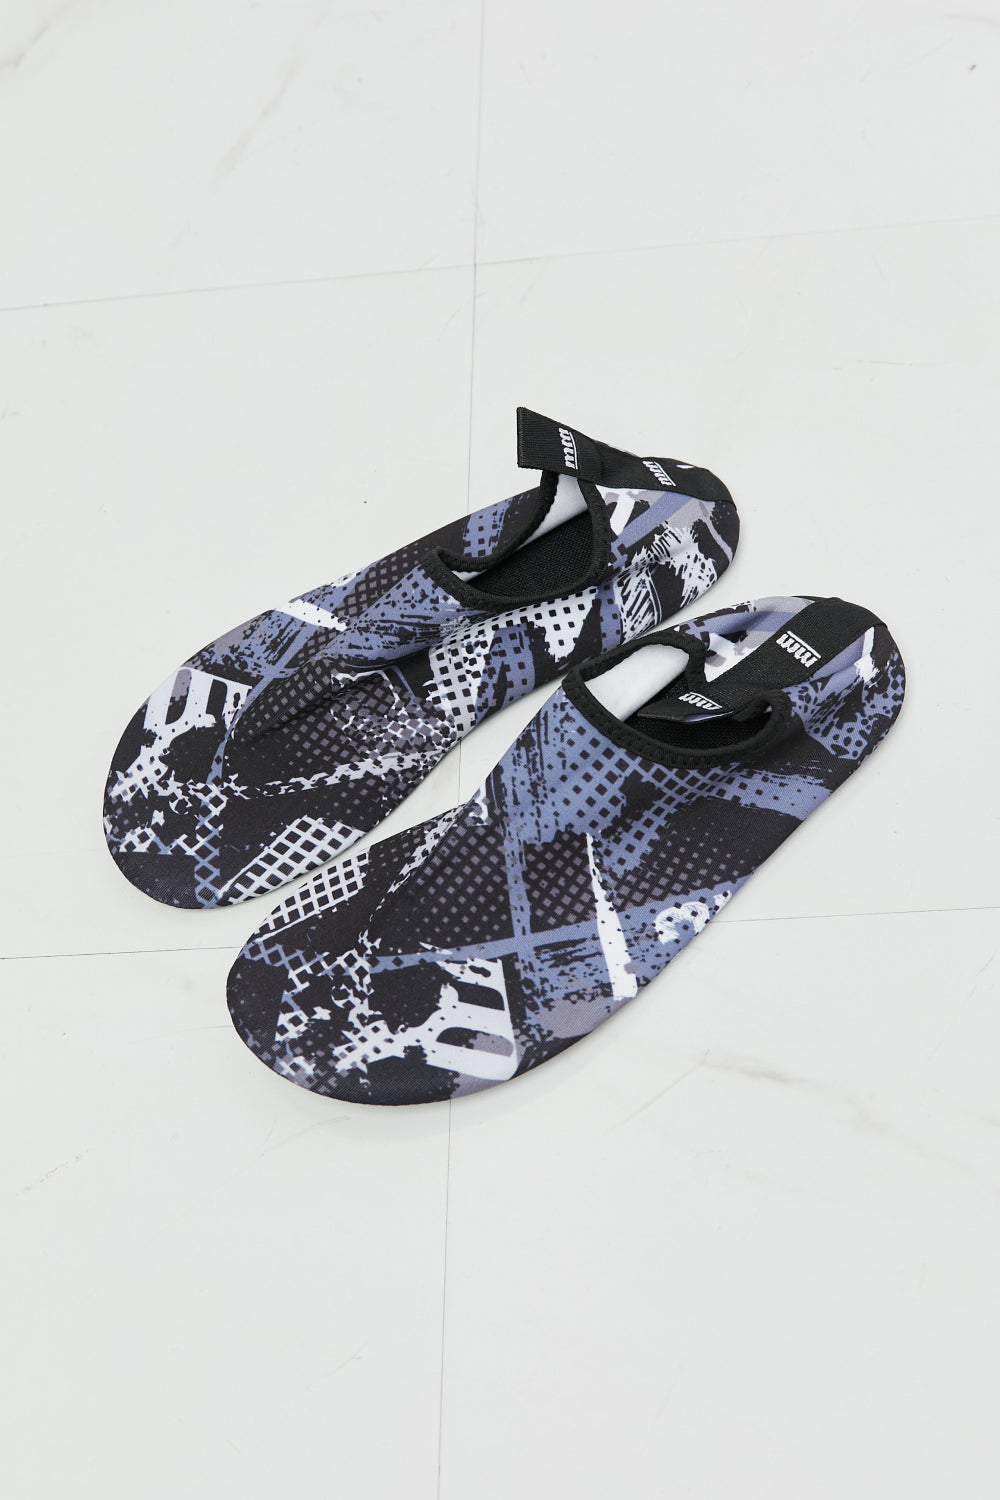 MMshoes On The Shore Water Shoes in Black Pattern - BEAUTY COSMOTICS SHOP